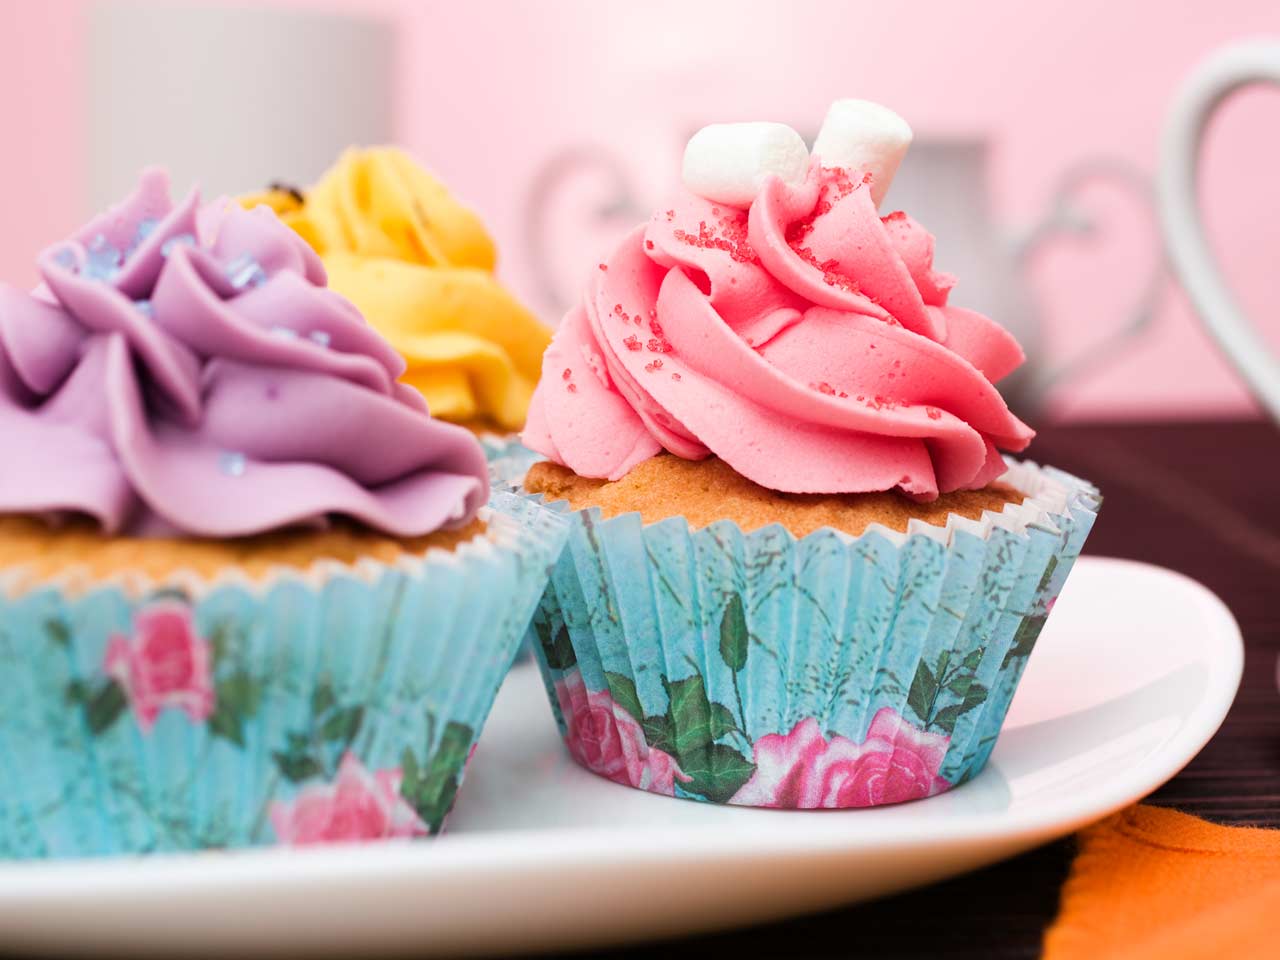 Basic cupcakes with buttercream icing